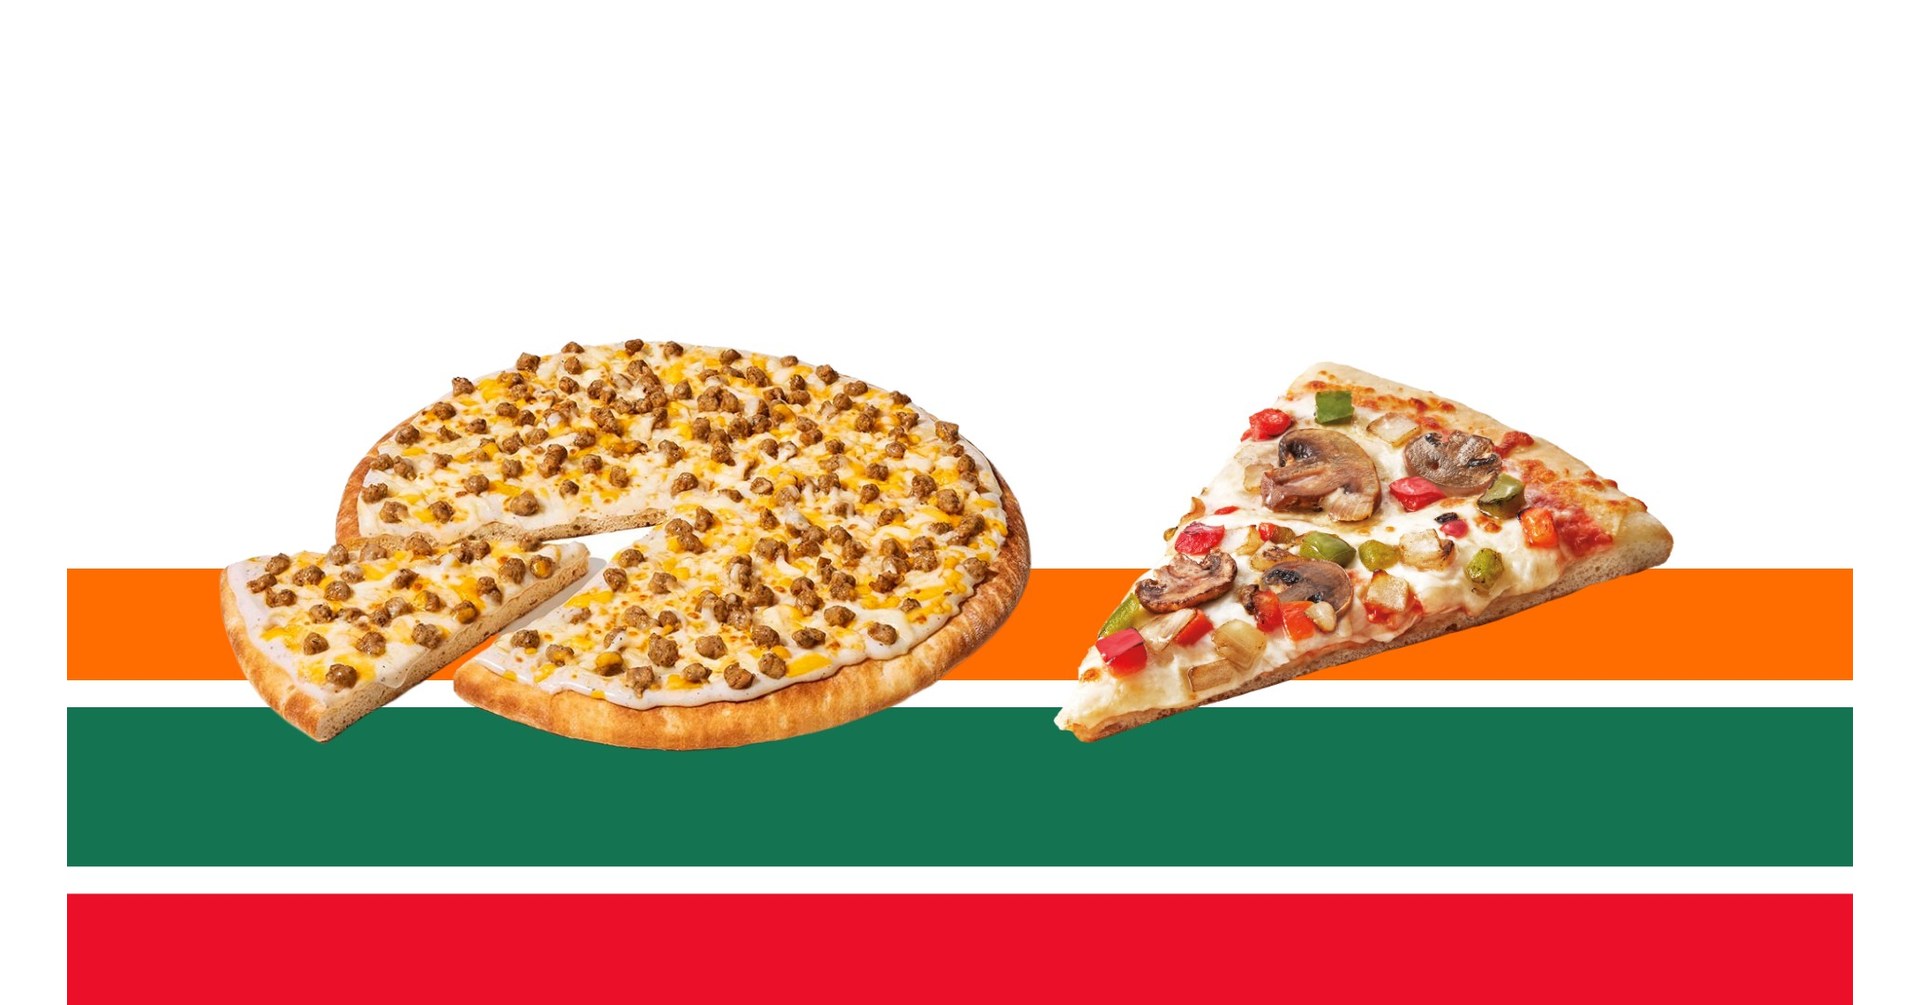 7Eleven Expands Pizza Menu with Two New Varieties Breakfast and Veggie